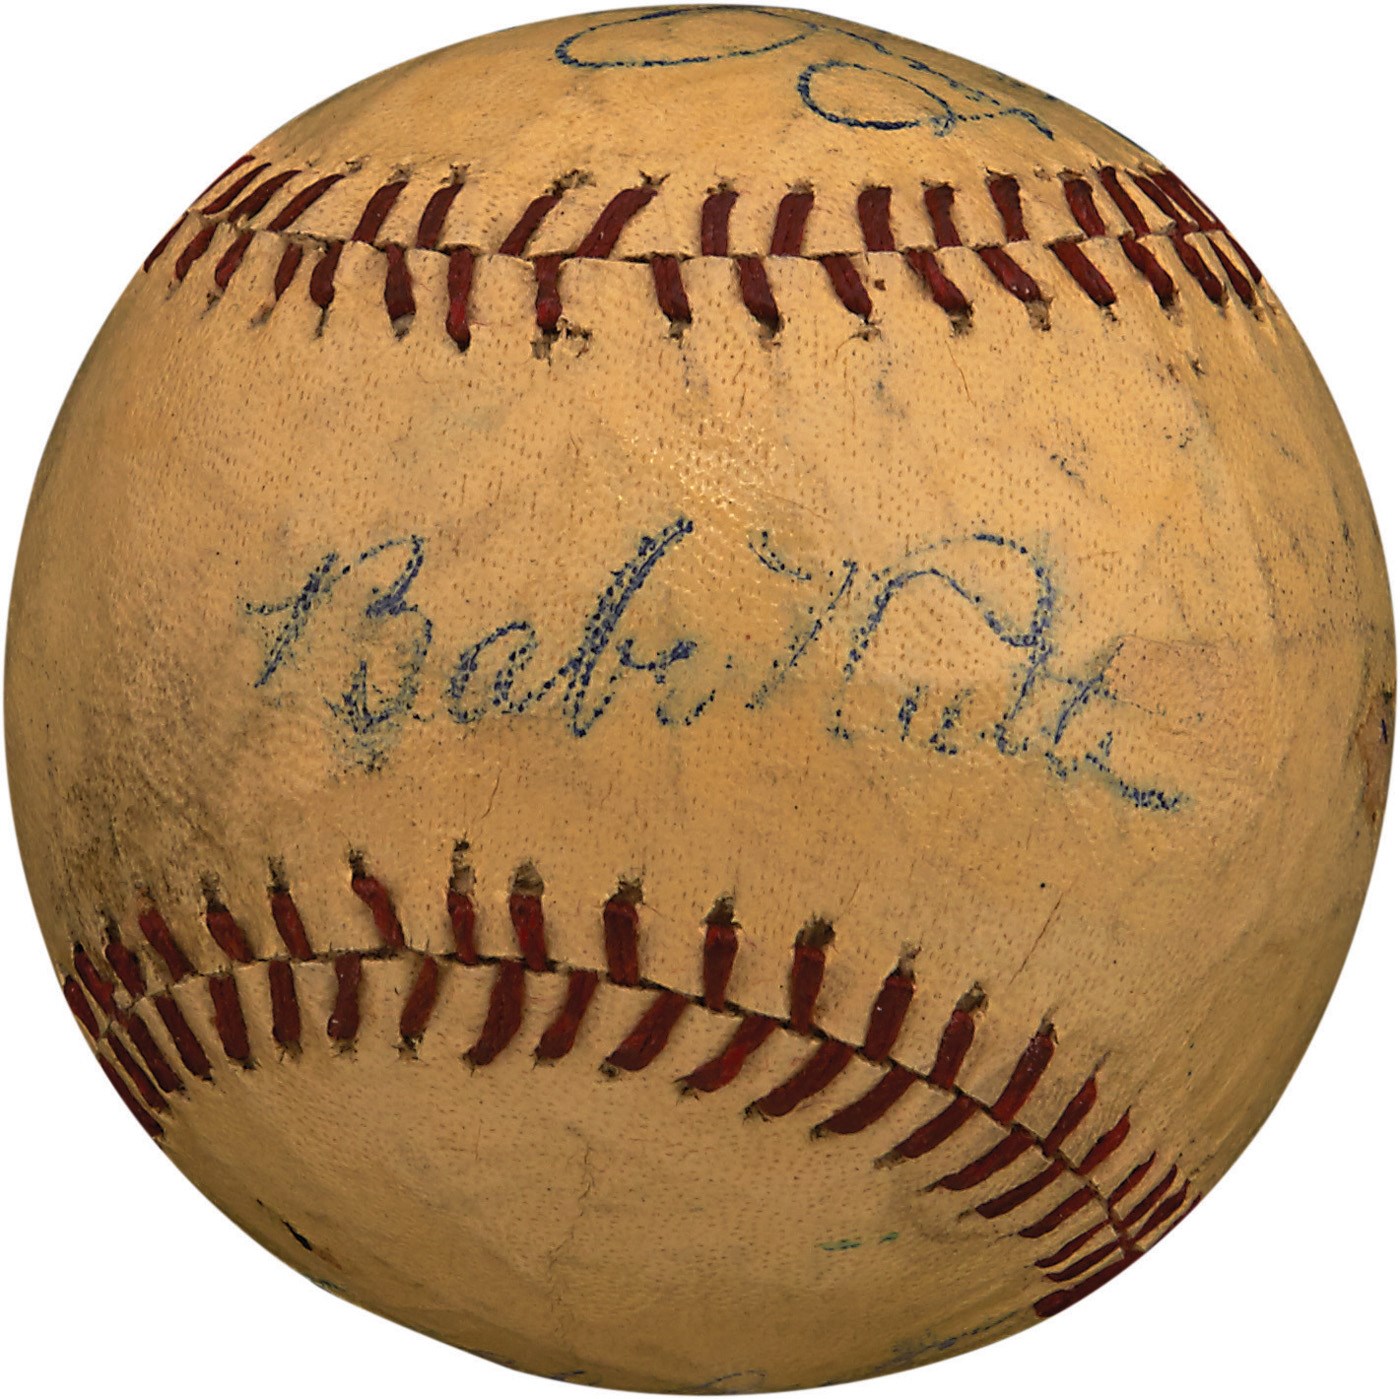 NY Yankees, Giants & Mets - 1928-29 New York Yankees Team-Signed Baseball with Proof of Signing (PSA)